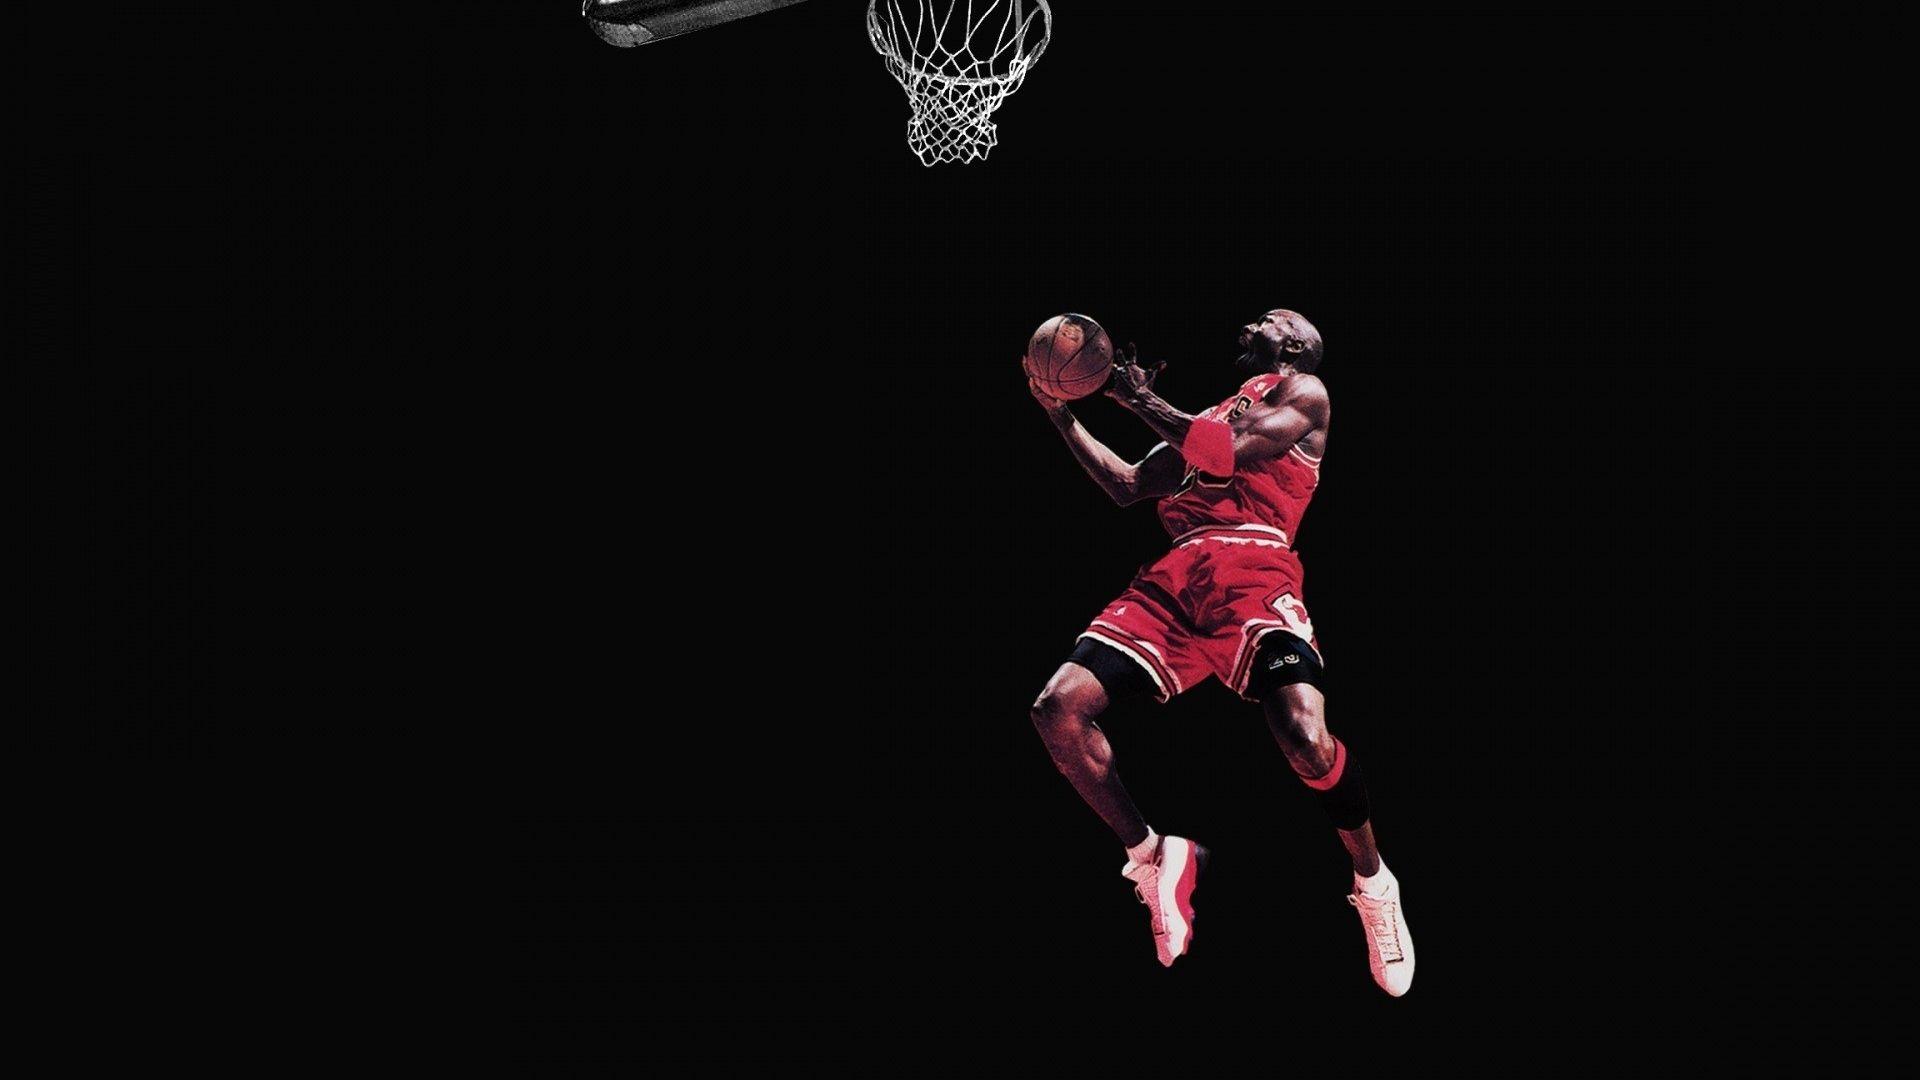 Shoot Basketball Basketry Dark Background iPhone 8 Wallpapers Free Download